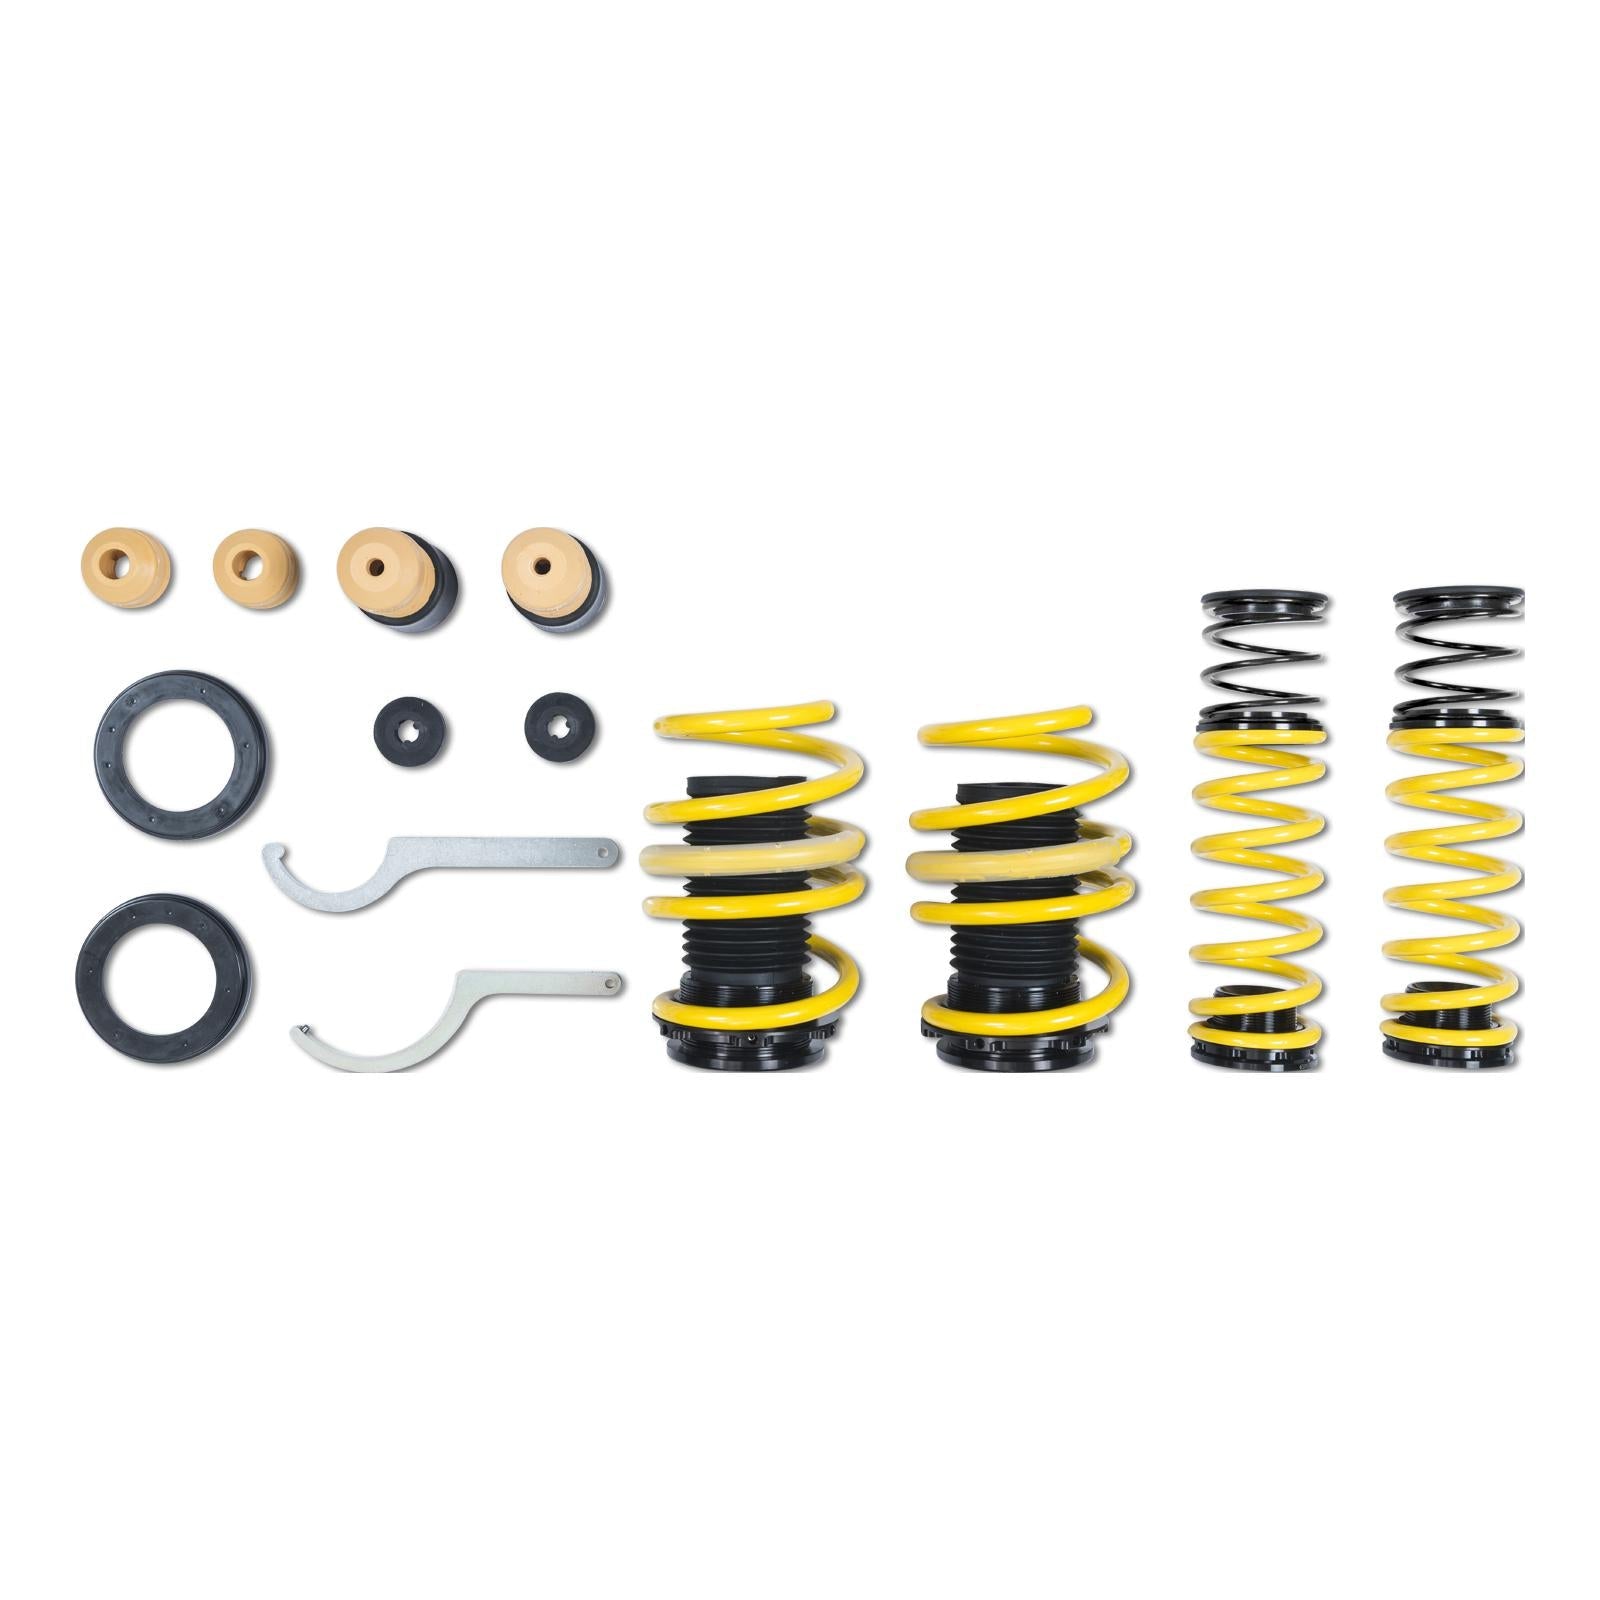 ST Suspensions Adjustable Lowering Springs - Audi 8S TTS/TT RS AWD With EDC System